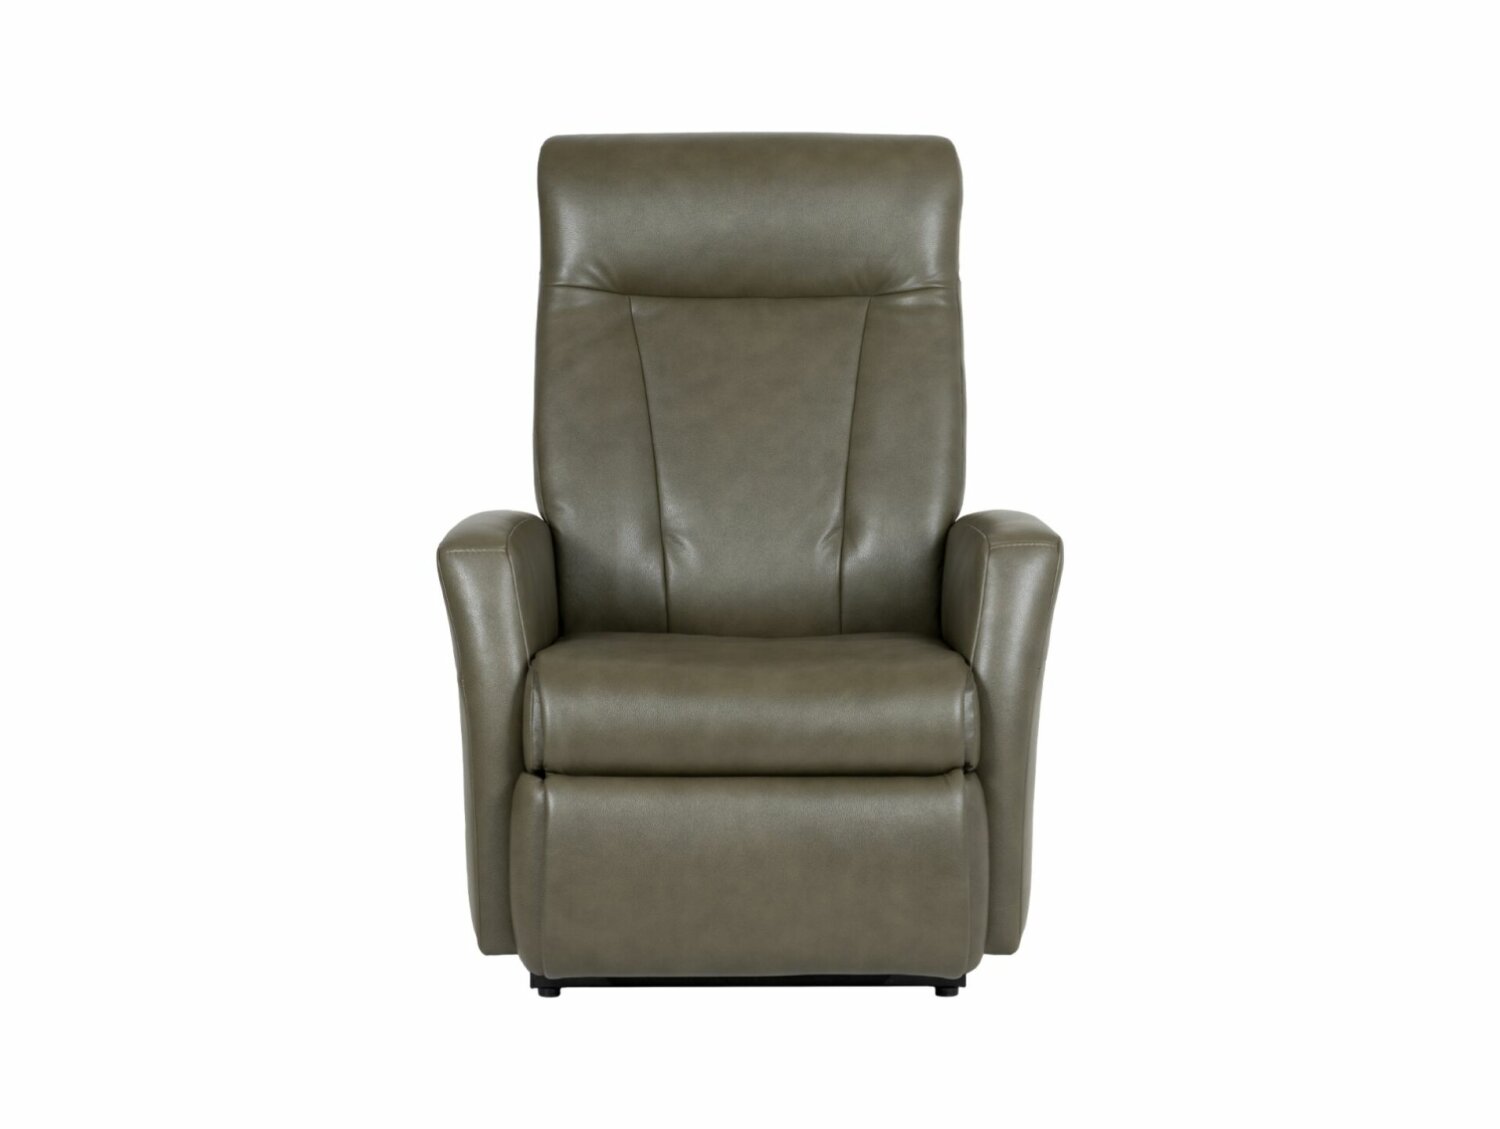 Oslo Large Luxury Power Lift Chair with Massage & Heat